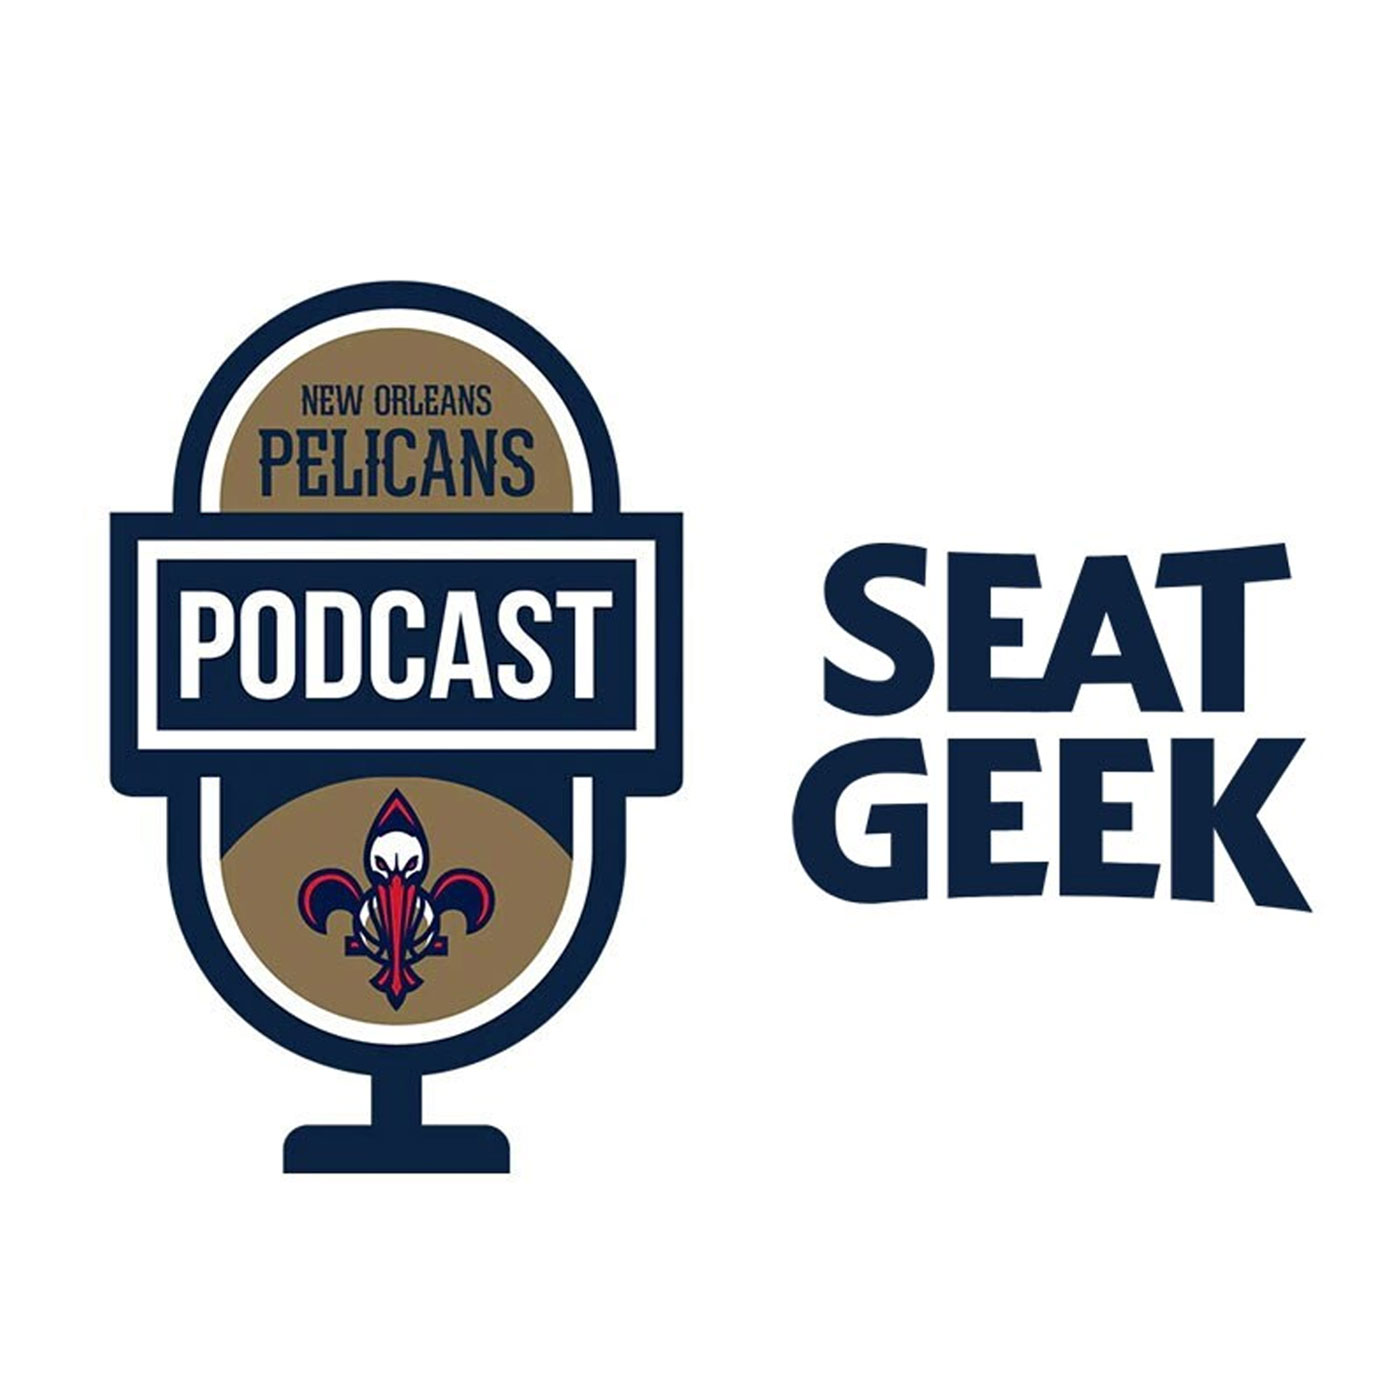 2022 NBA Draft Preview on the New Orleans Pelicans Podcast presented by SeatGeek - June 23, 2022